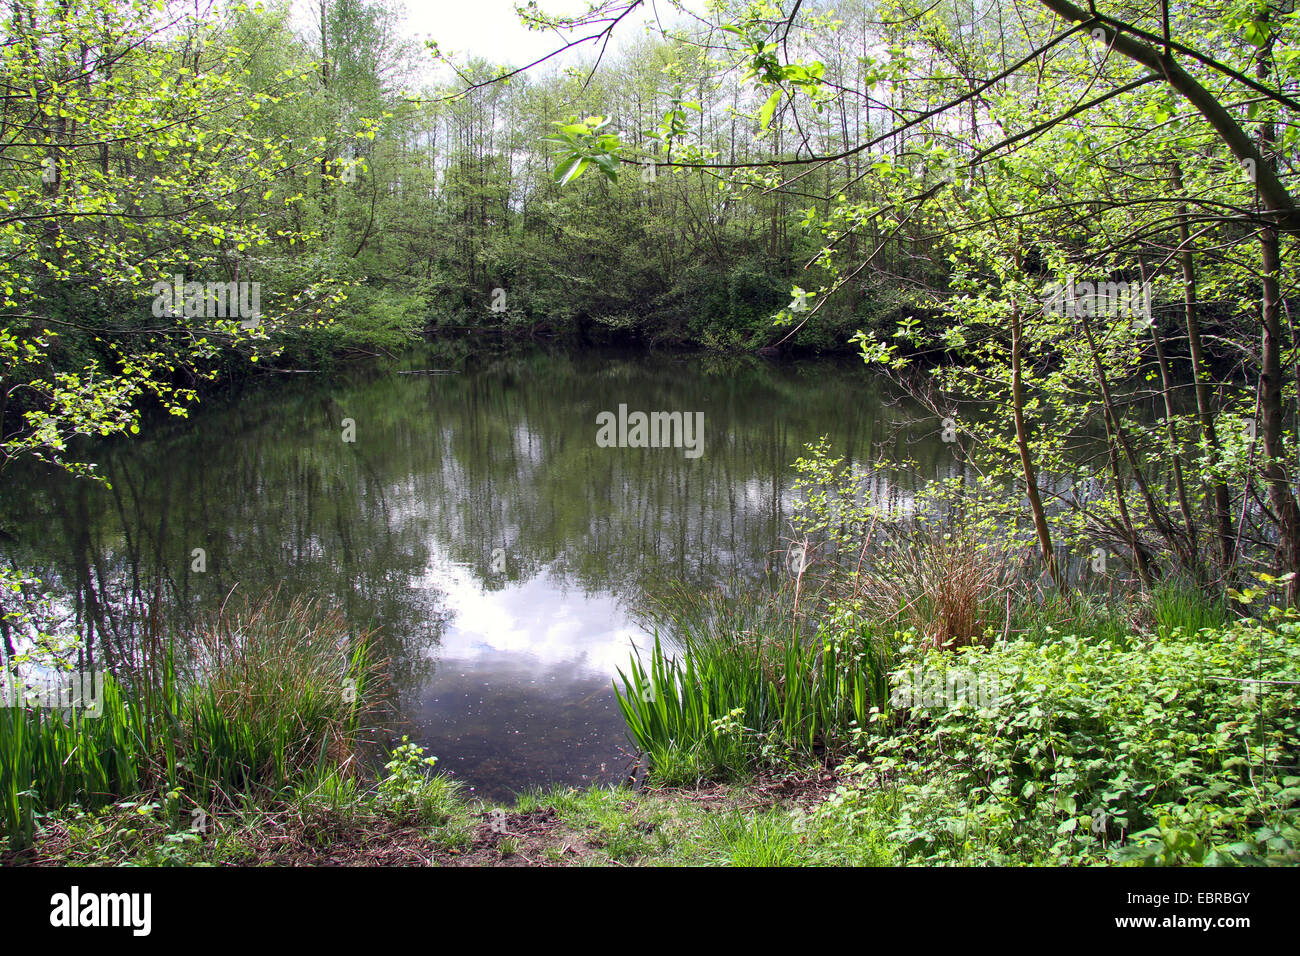 man-made pond in renatured area, Germany Stock Photo